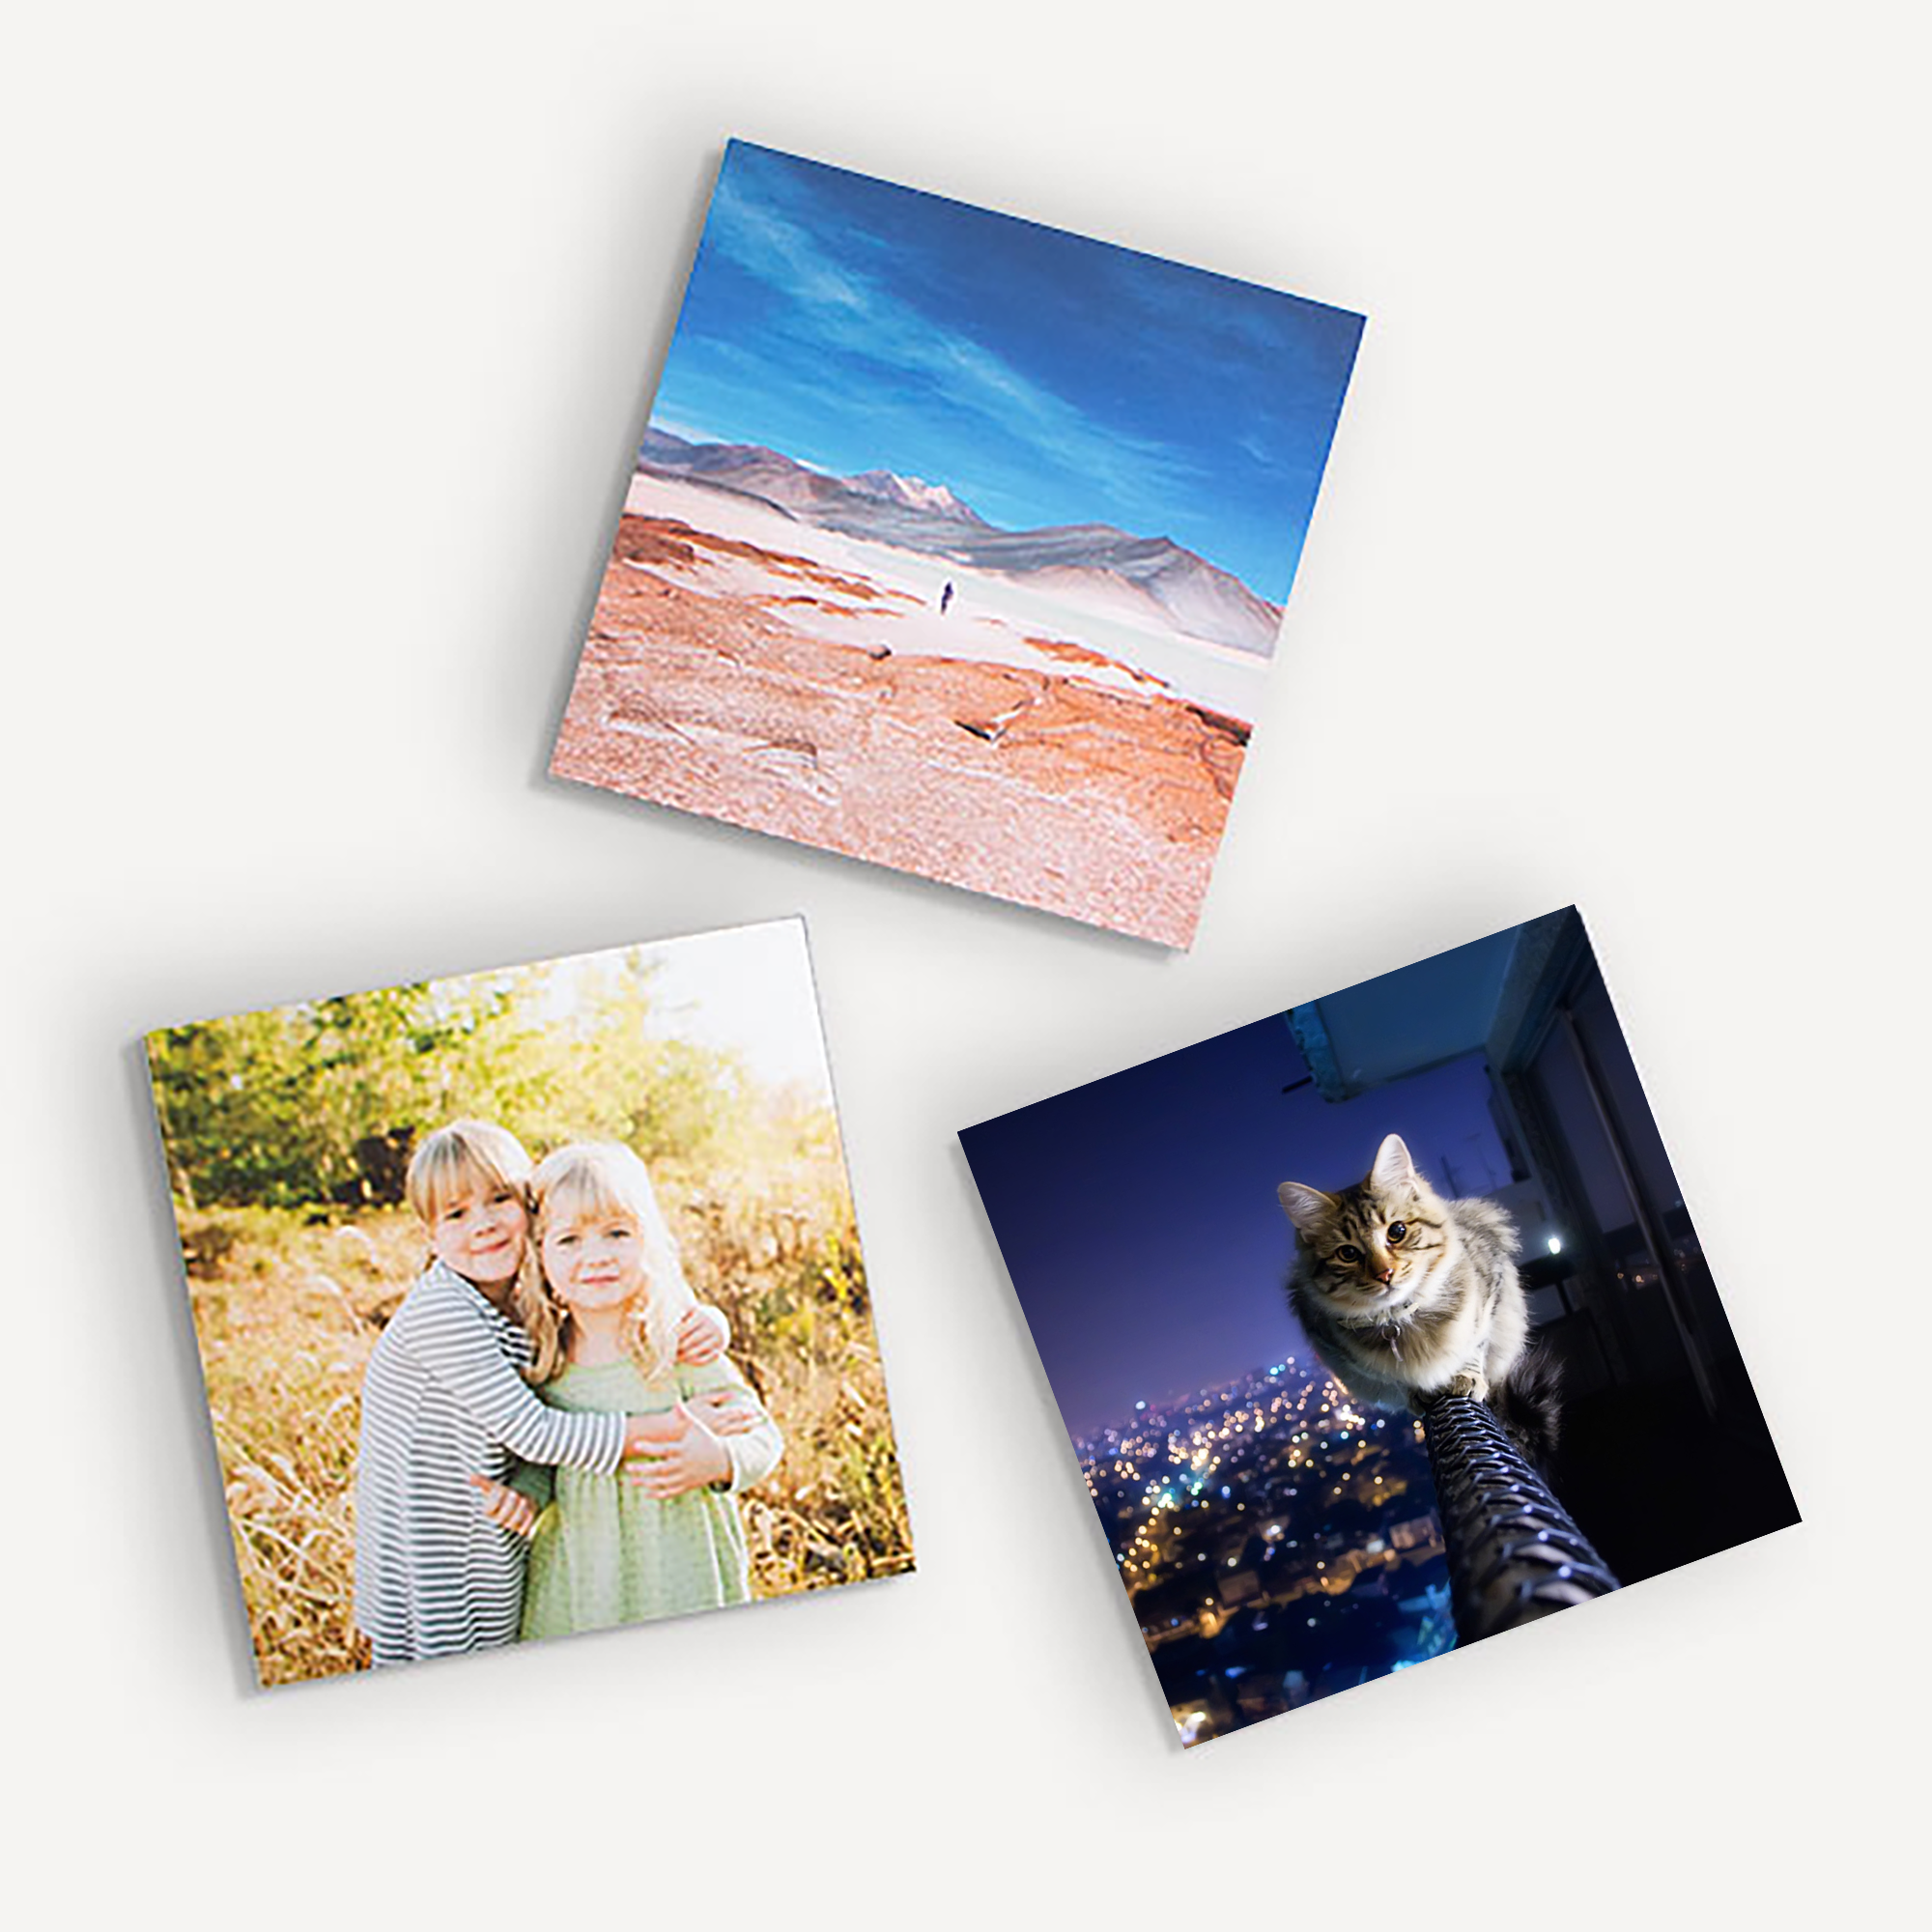 6-Pack 8x8 Custom Photo Prints Mix Tiles, Photo Tiles Not Canvas,  Personalized Photo Board Wall Prints, Collage Wall Art Picture Gifts for  Family and